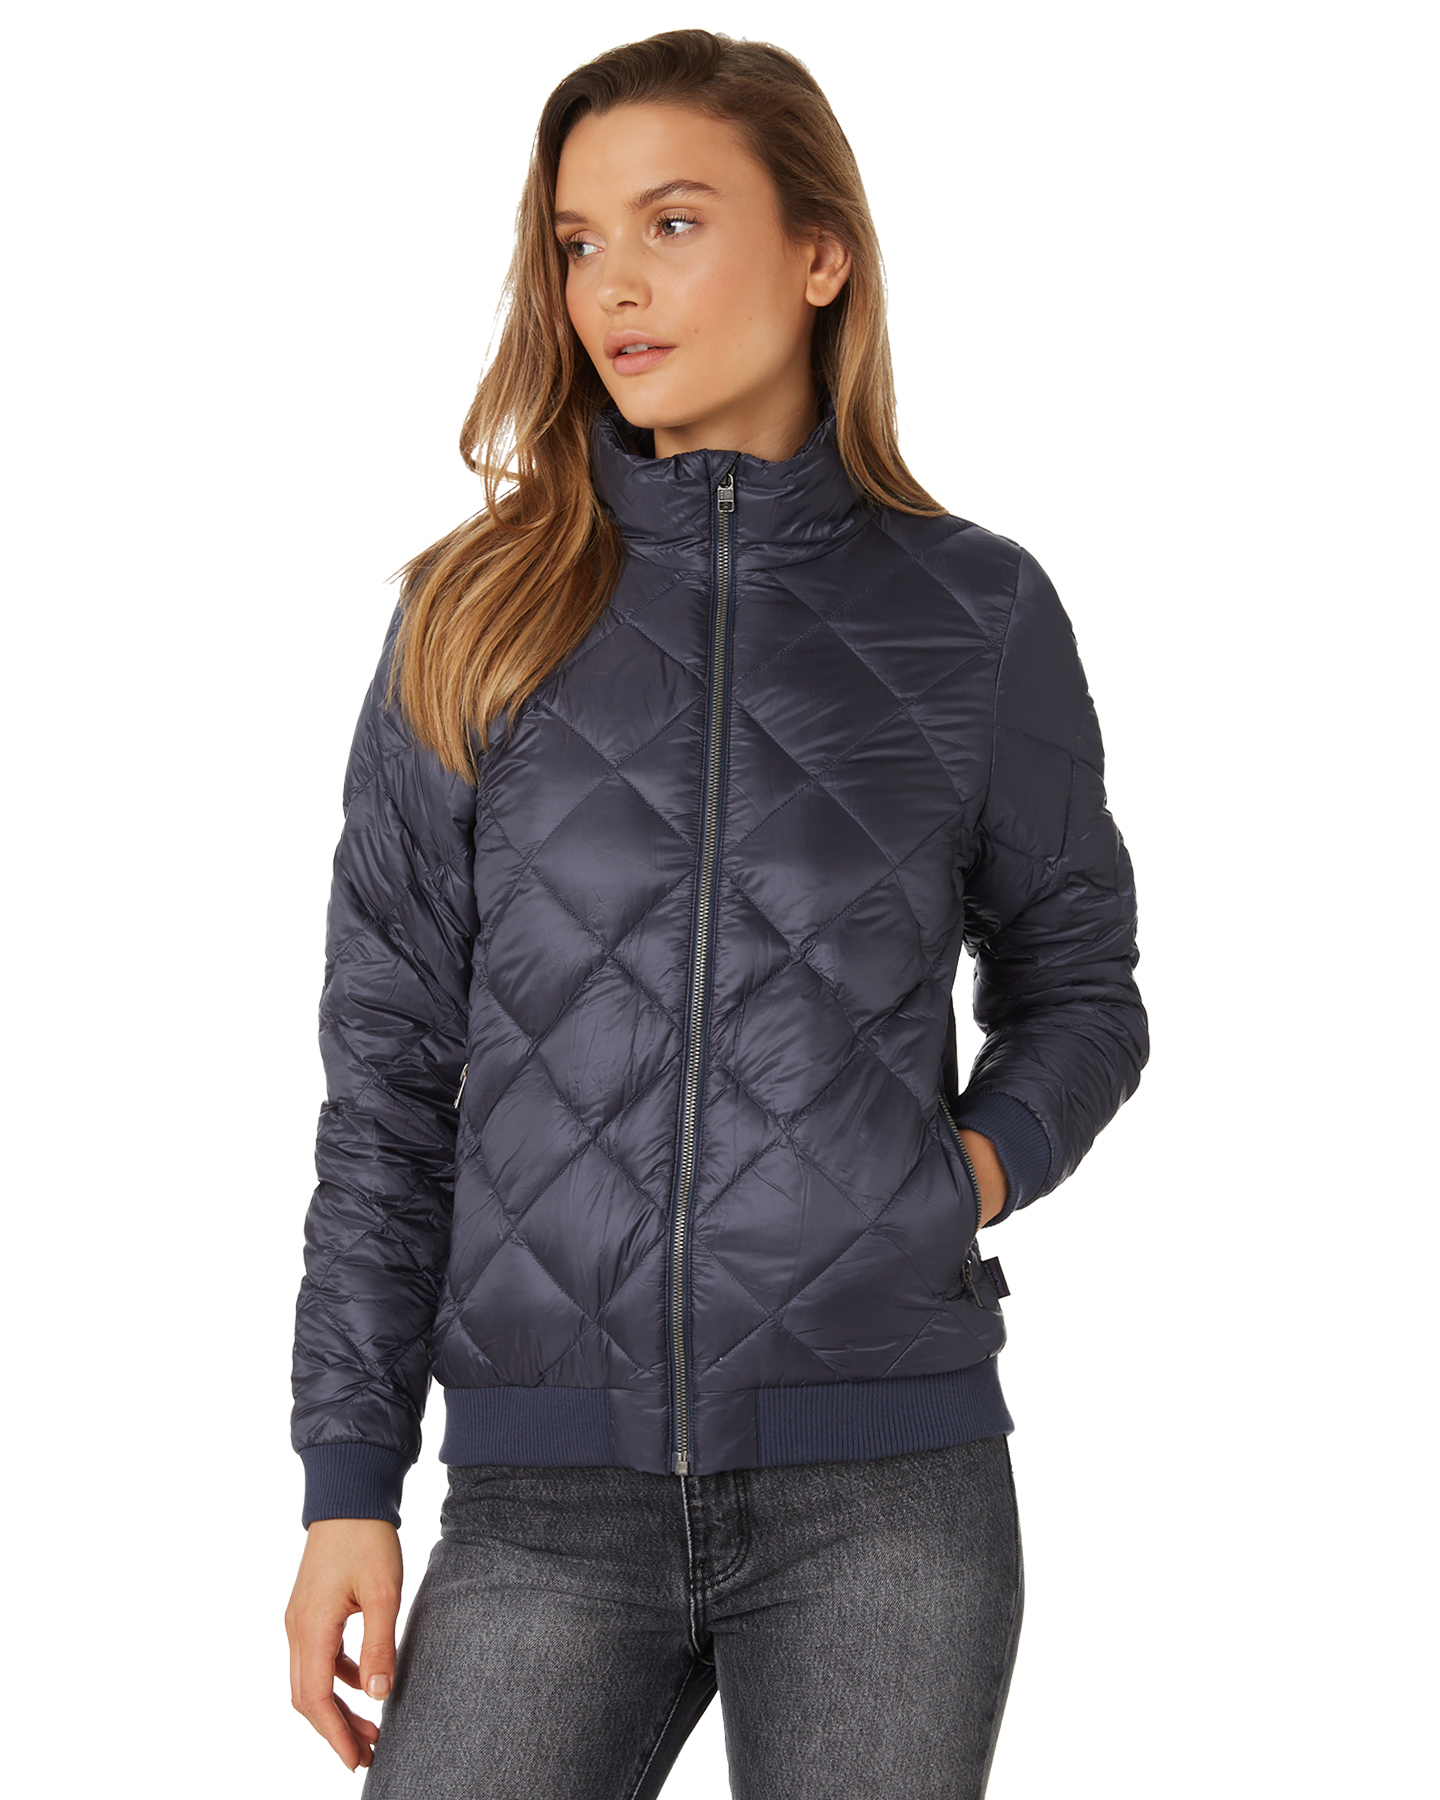 Patagonia Womens Prow Bomber Jacket - Smolder Blue | SurfStitch